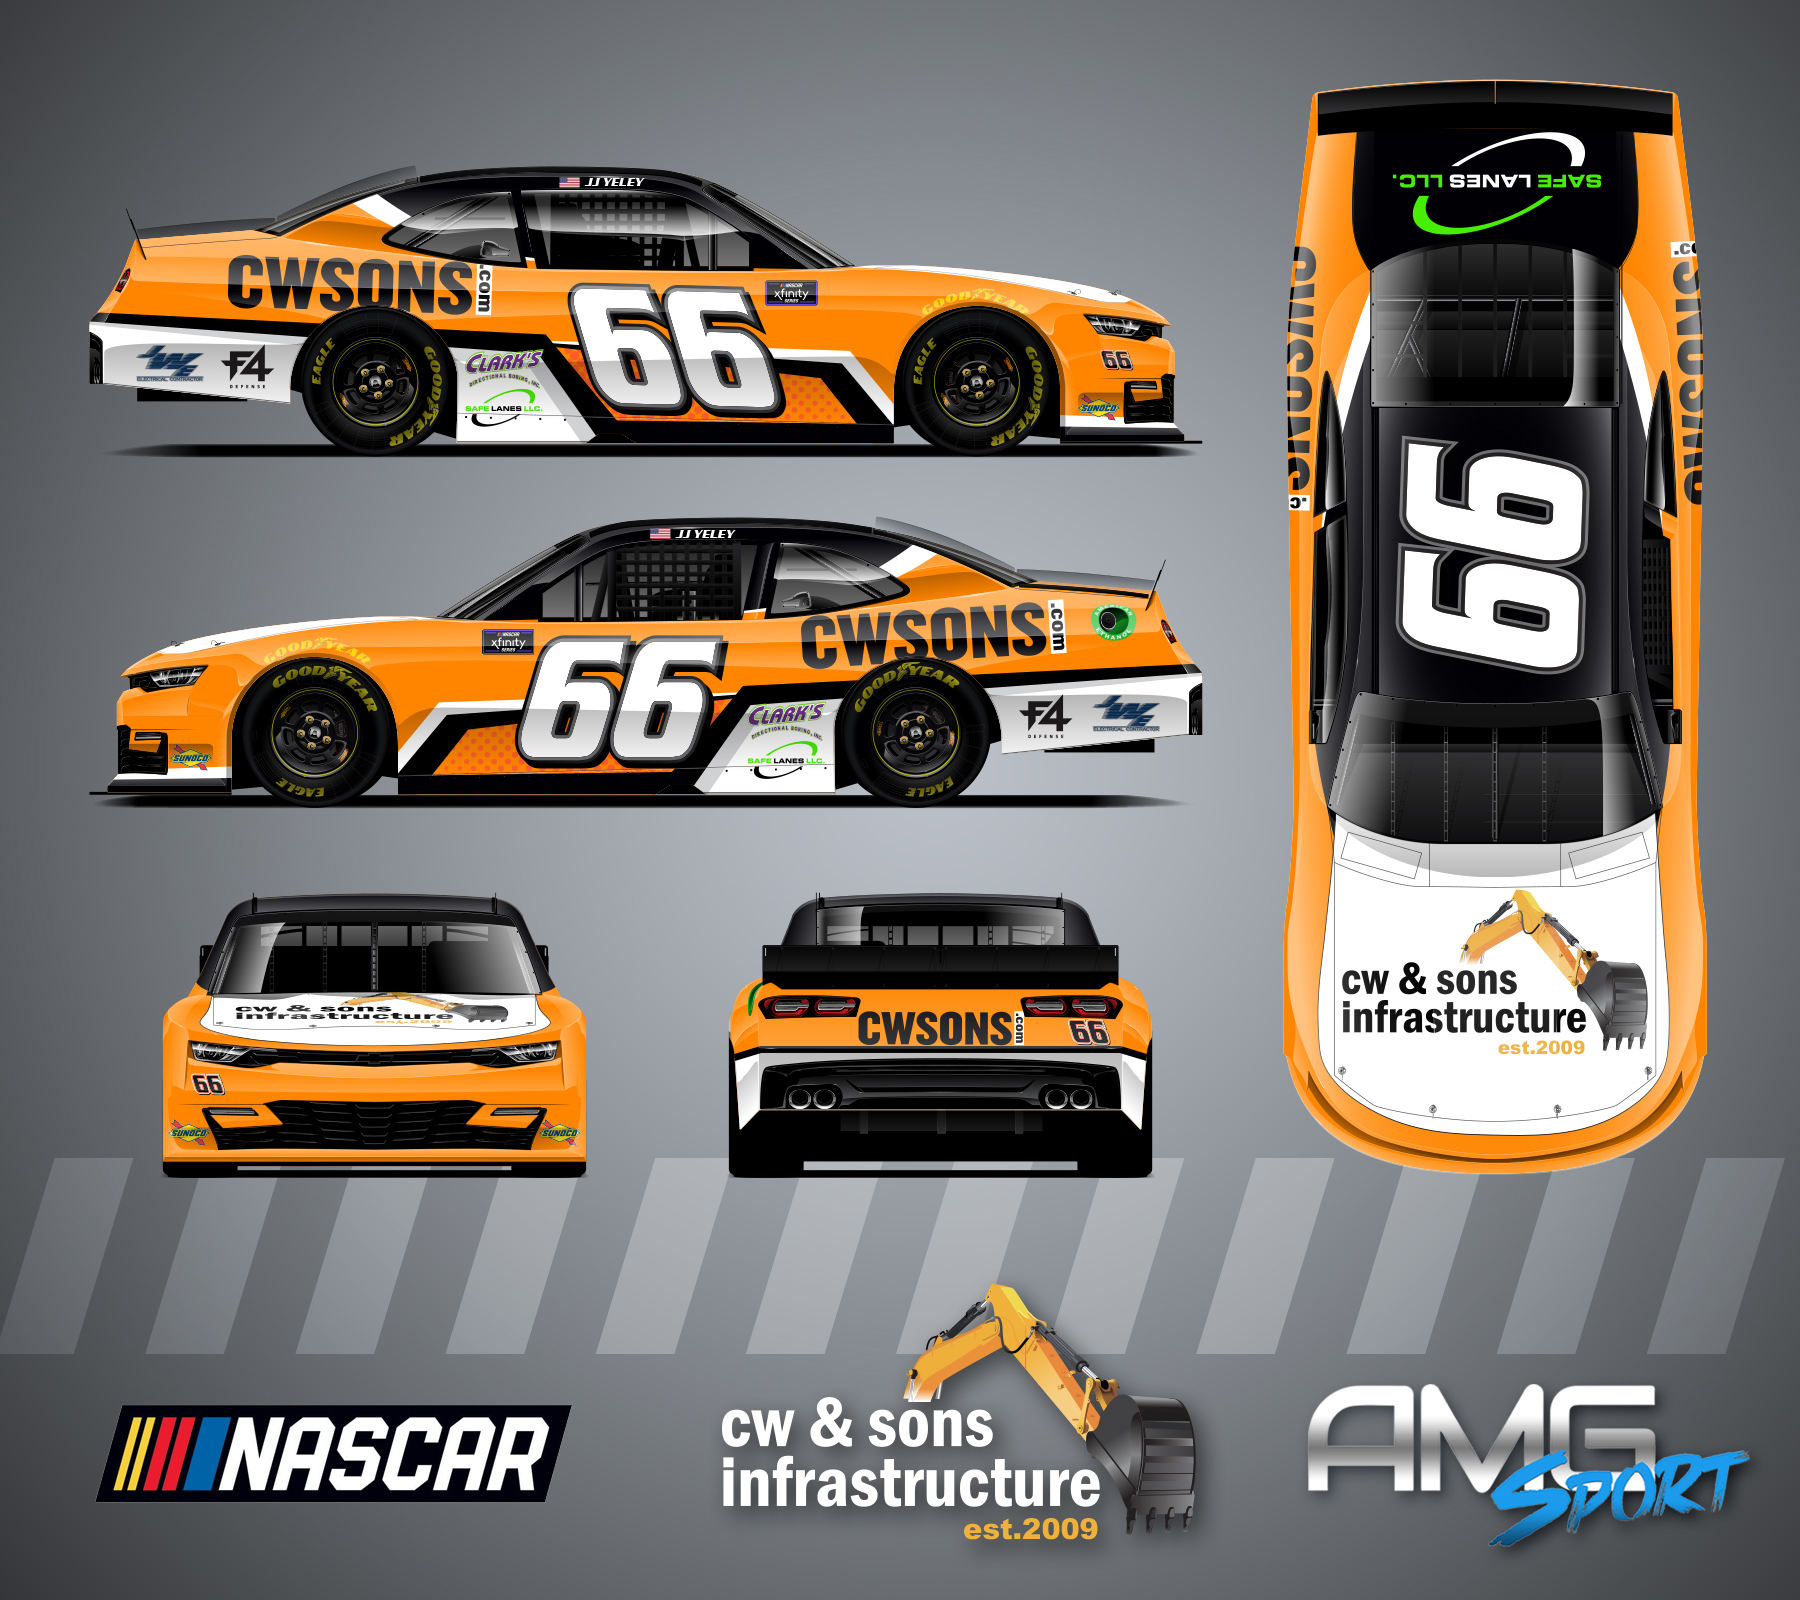 CW and Sons Infrastructure makes their return to NASCAR with the sponsorship of JJ Yeley at Martinsville